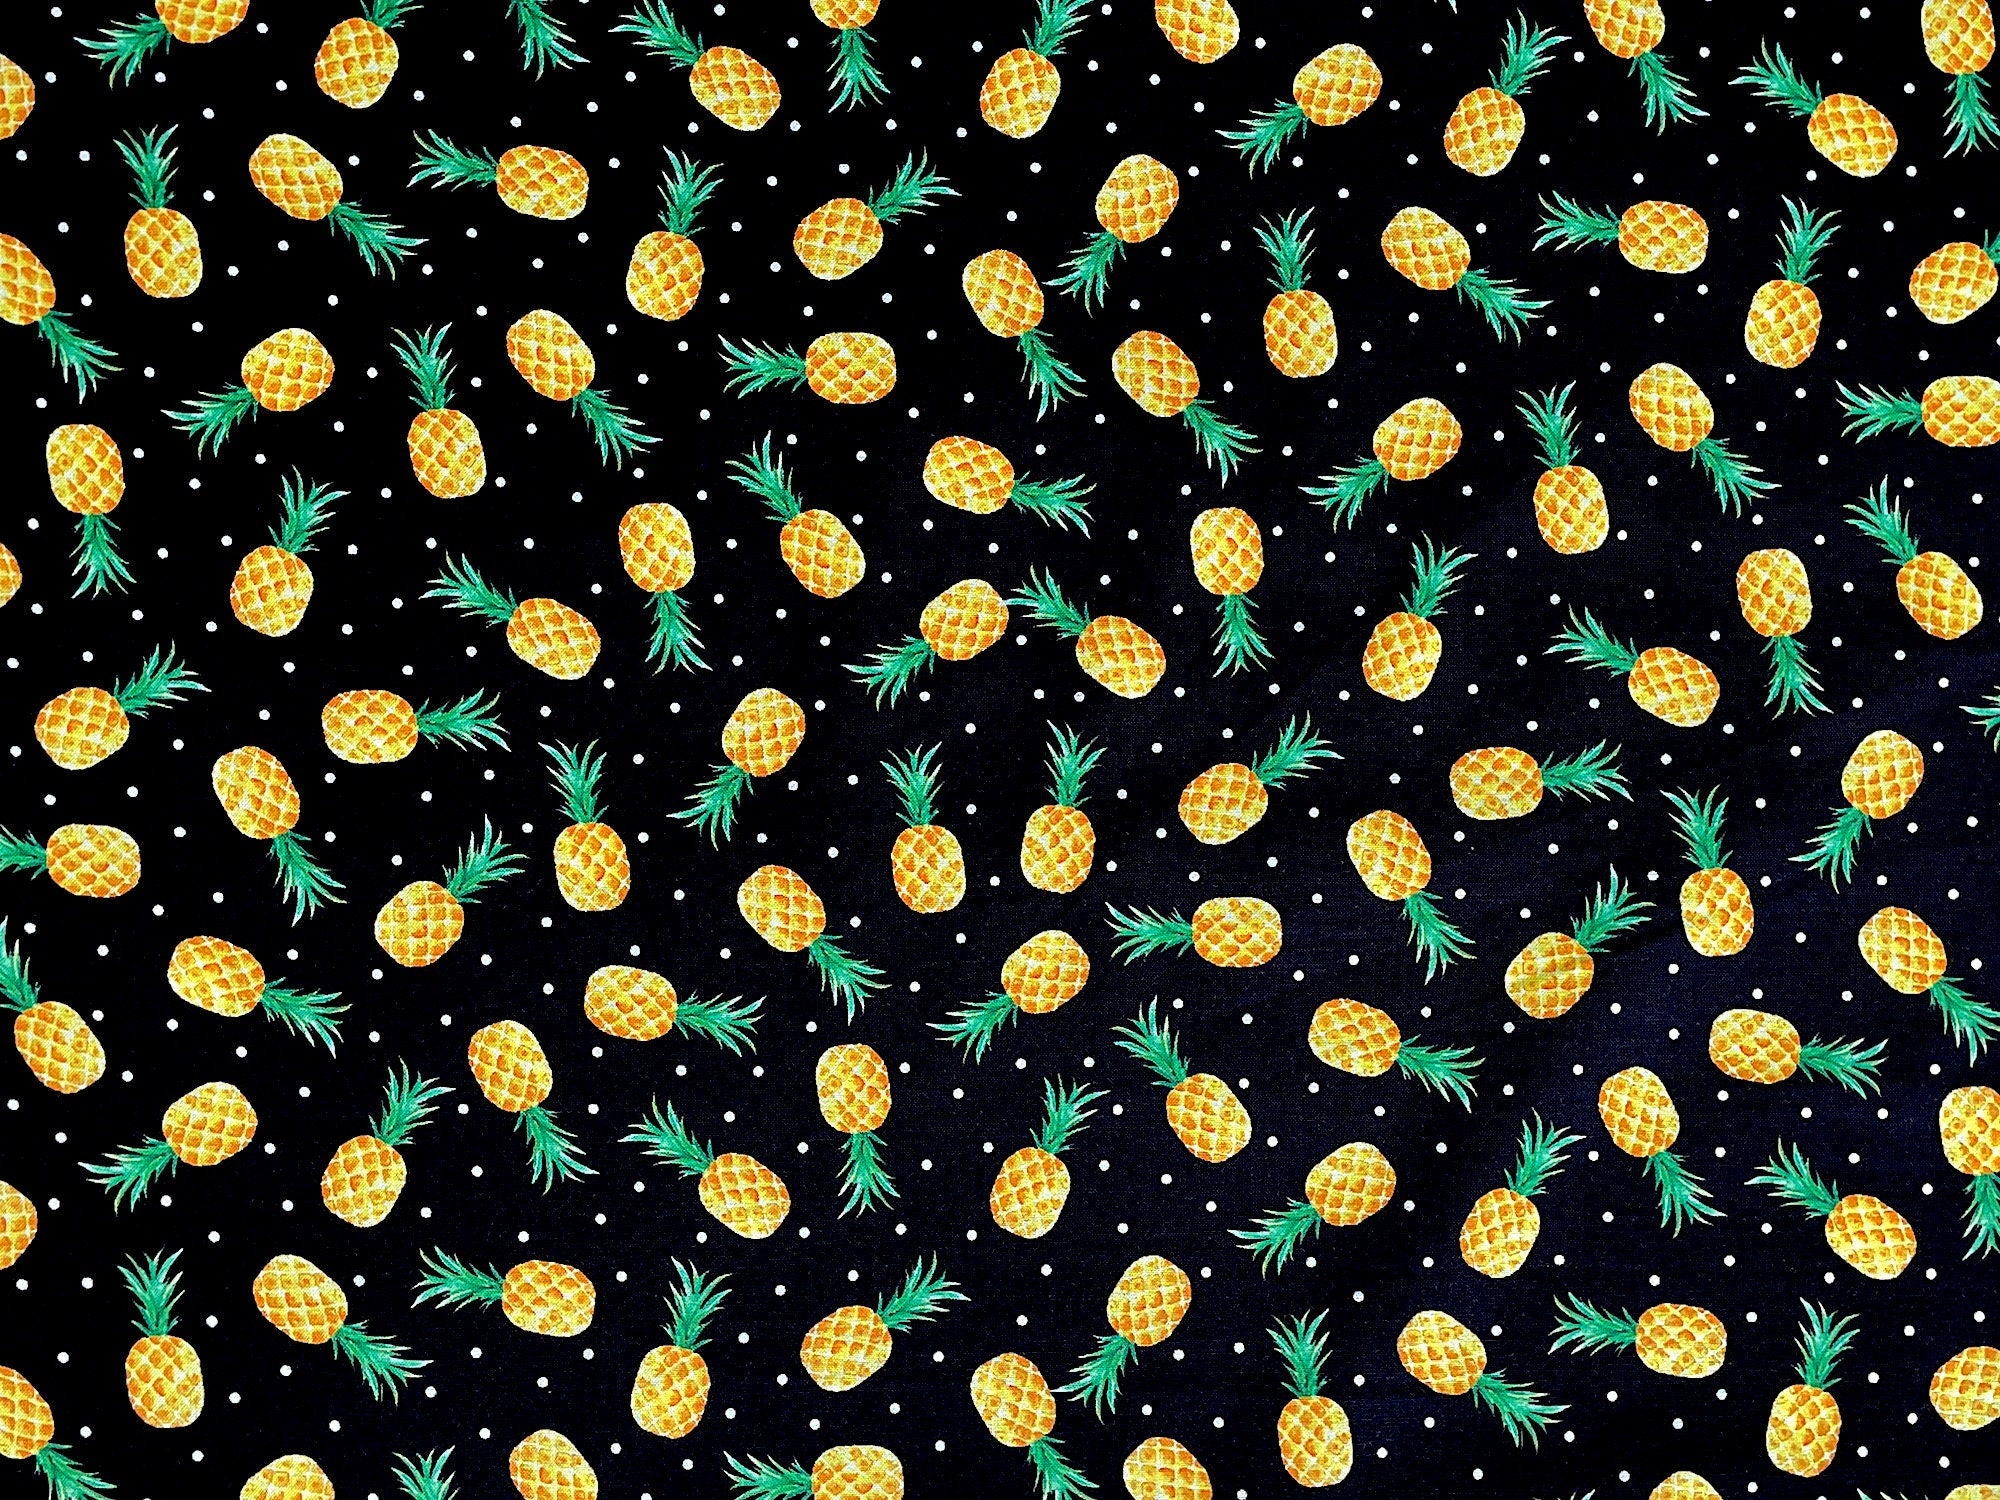 This fabric is part of the Fun In The sun collection and is covered with yellow pineapples.